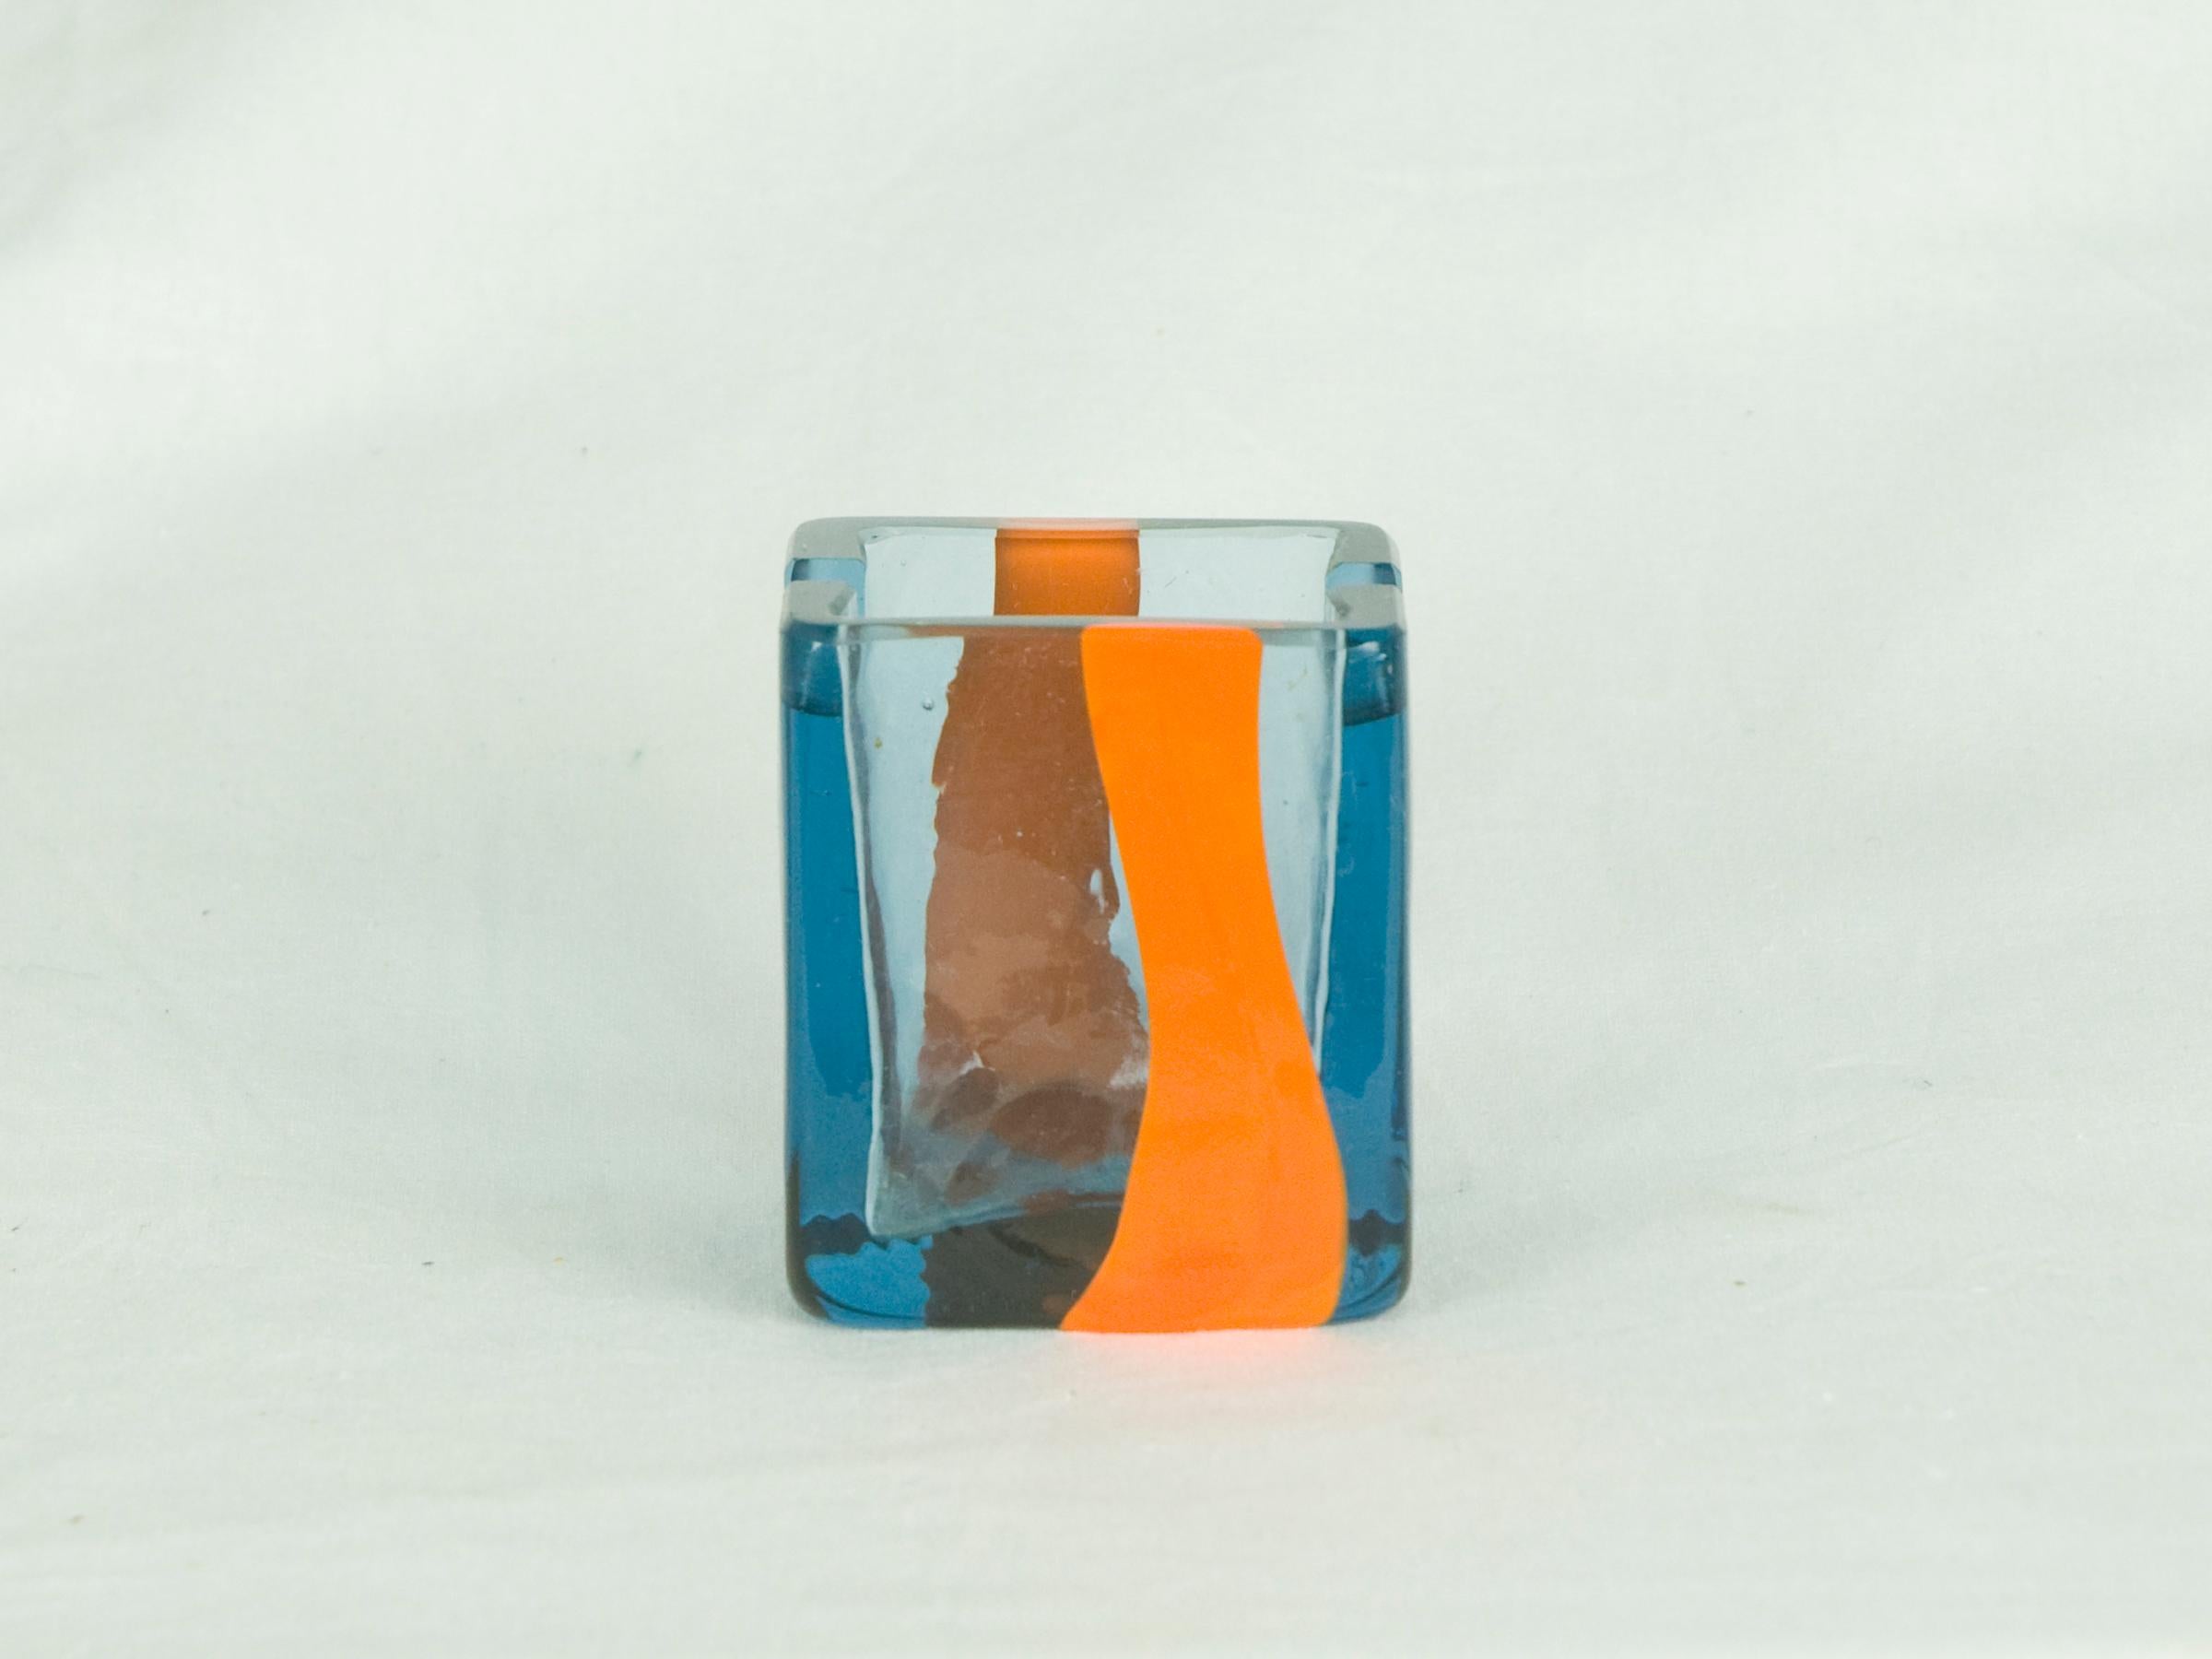 This small ashtray was designed by Pierre Cardin for Venini in the 1960s. It is executed in electric blue with an orange stripe. Engraved signature 